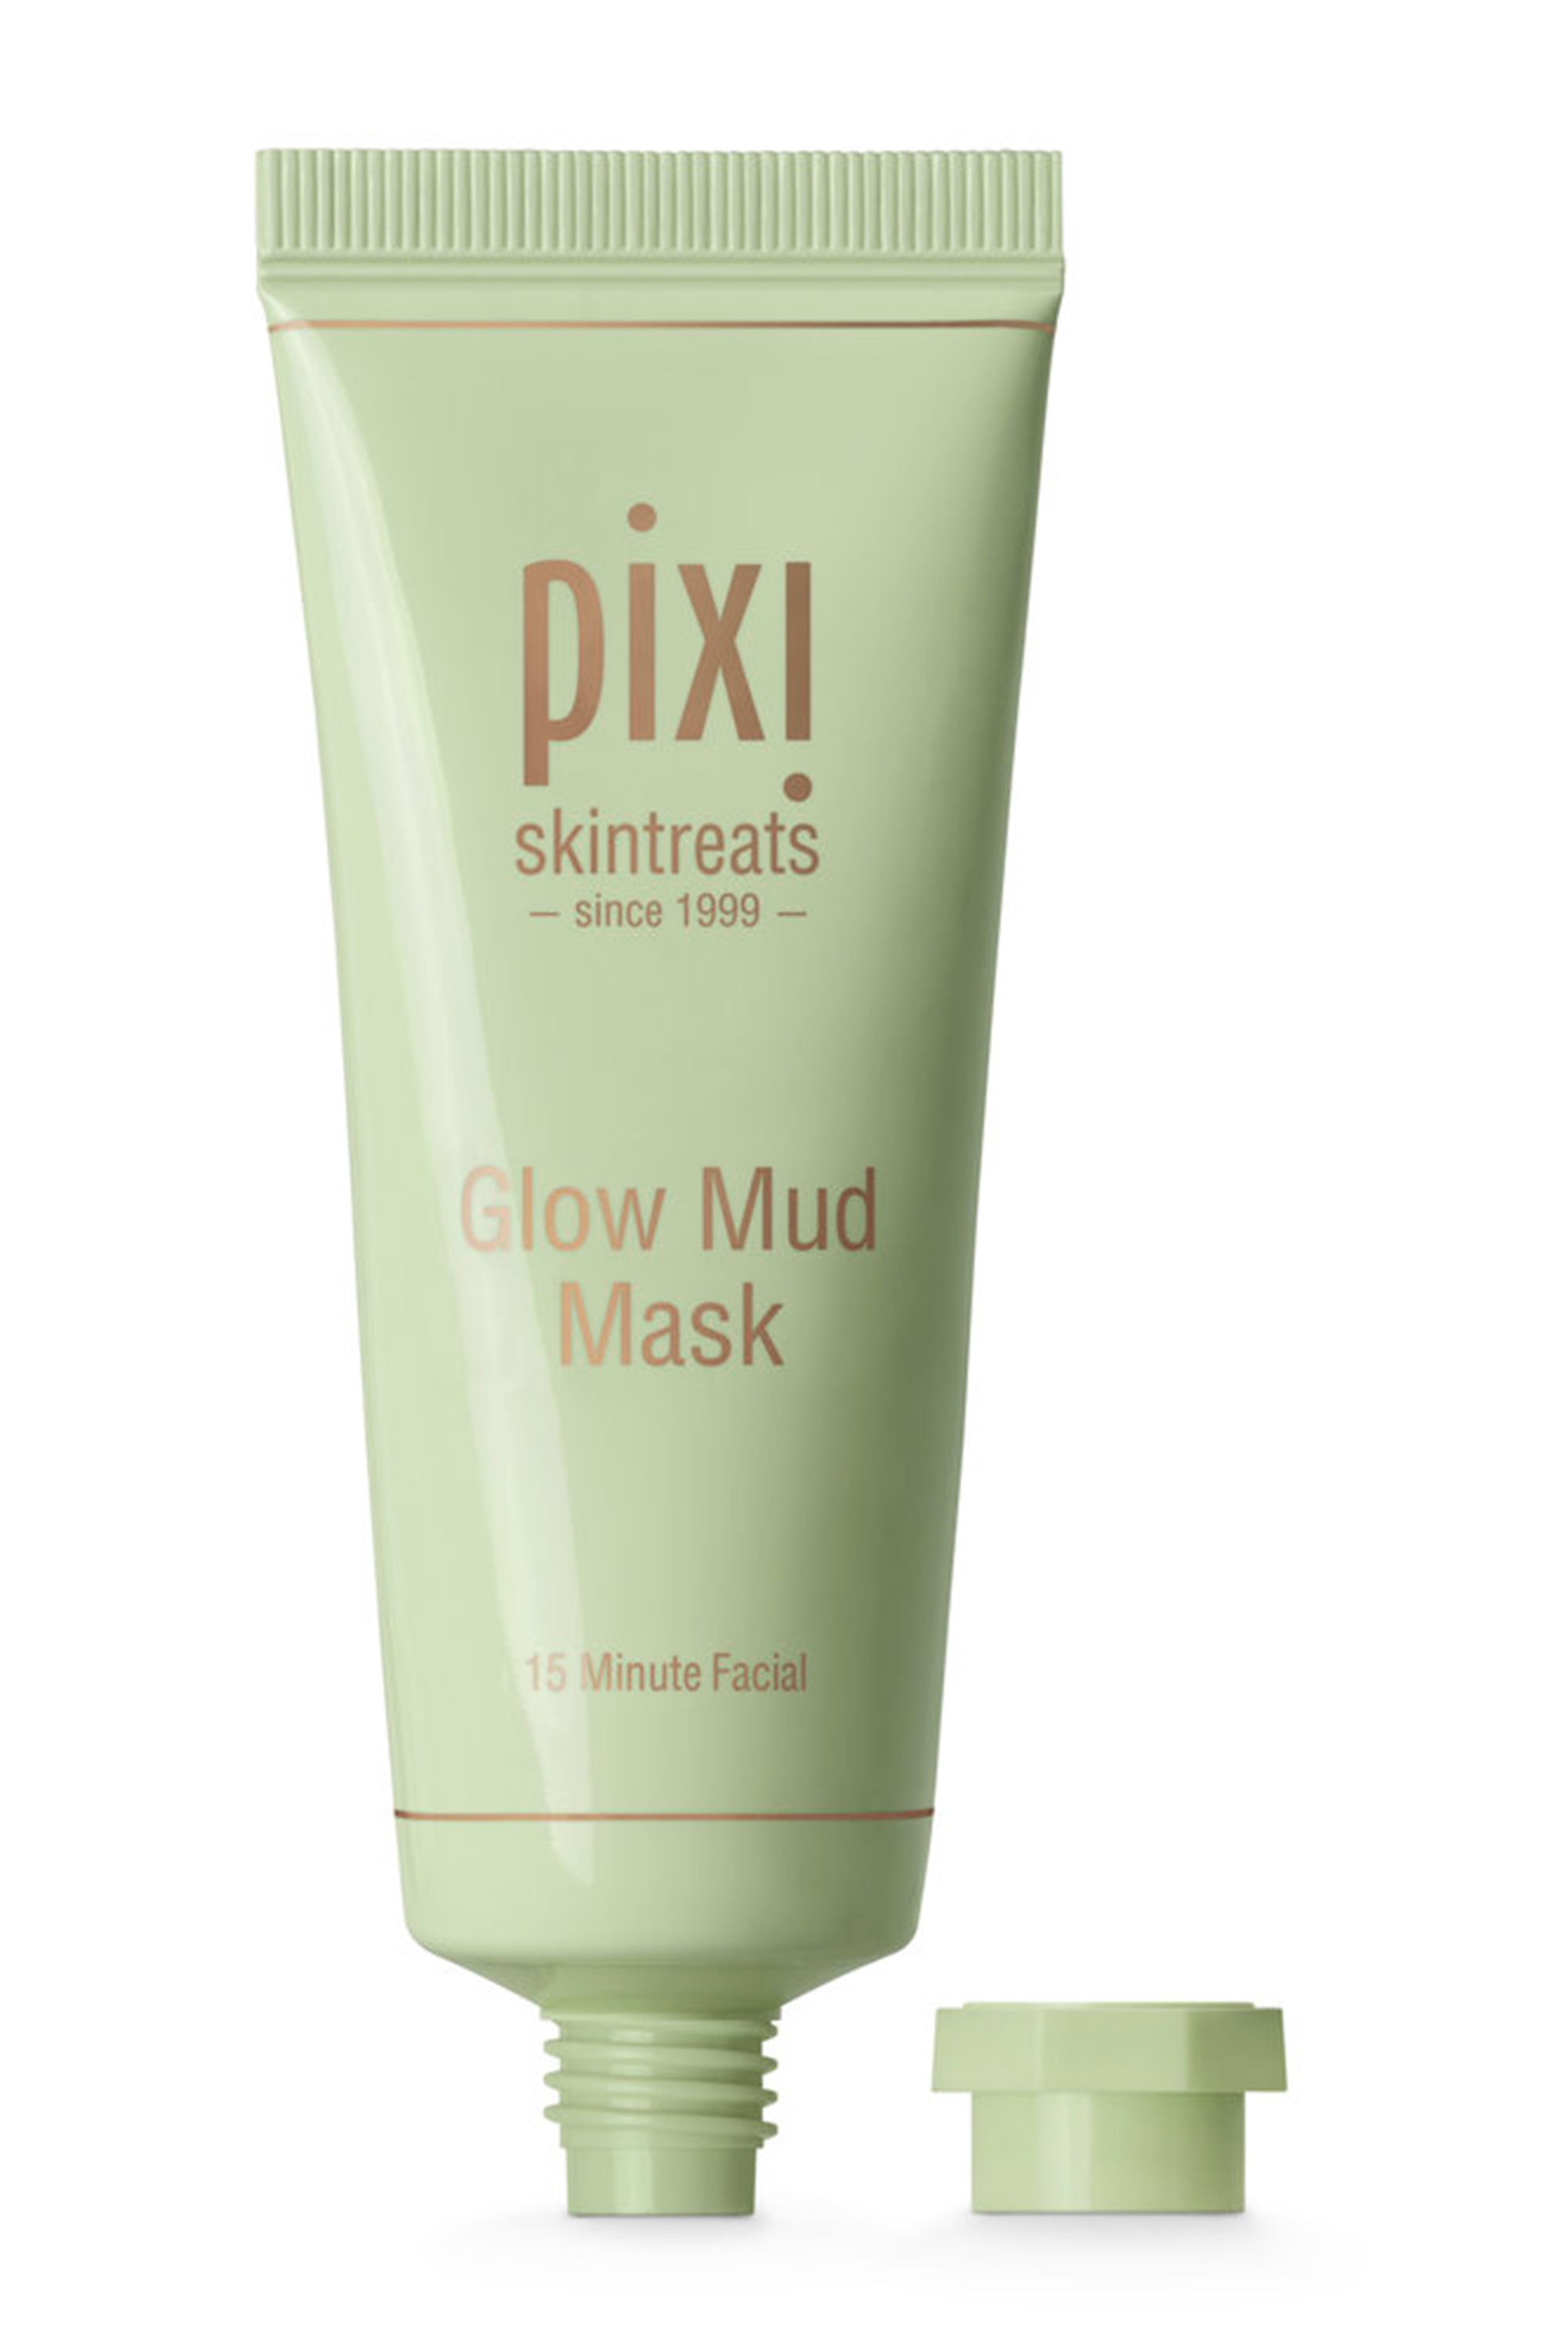 Rolly P. reccomend mud Best mask facial